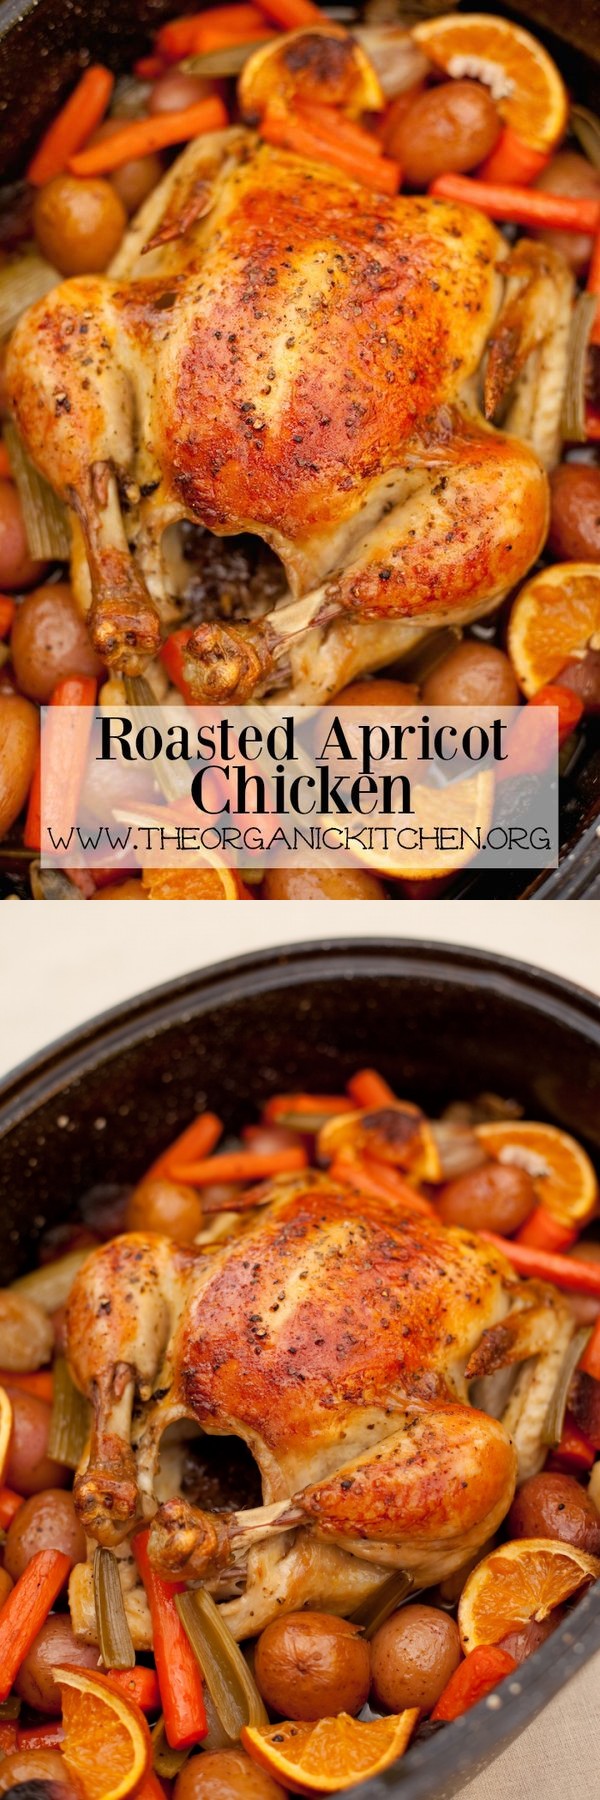 "Roasted Apricot Chicken with Herbs de Provence" ~ An Organic Kitchen ...